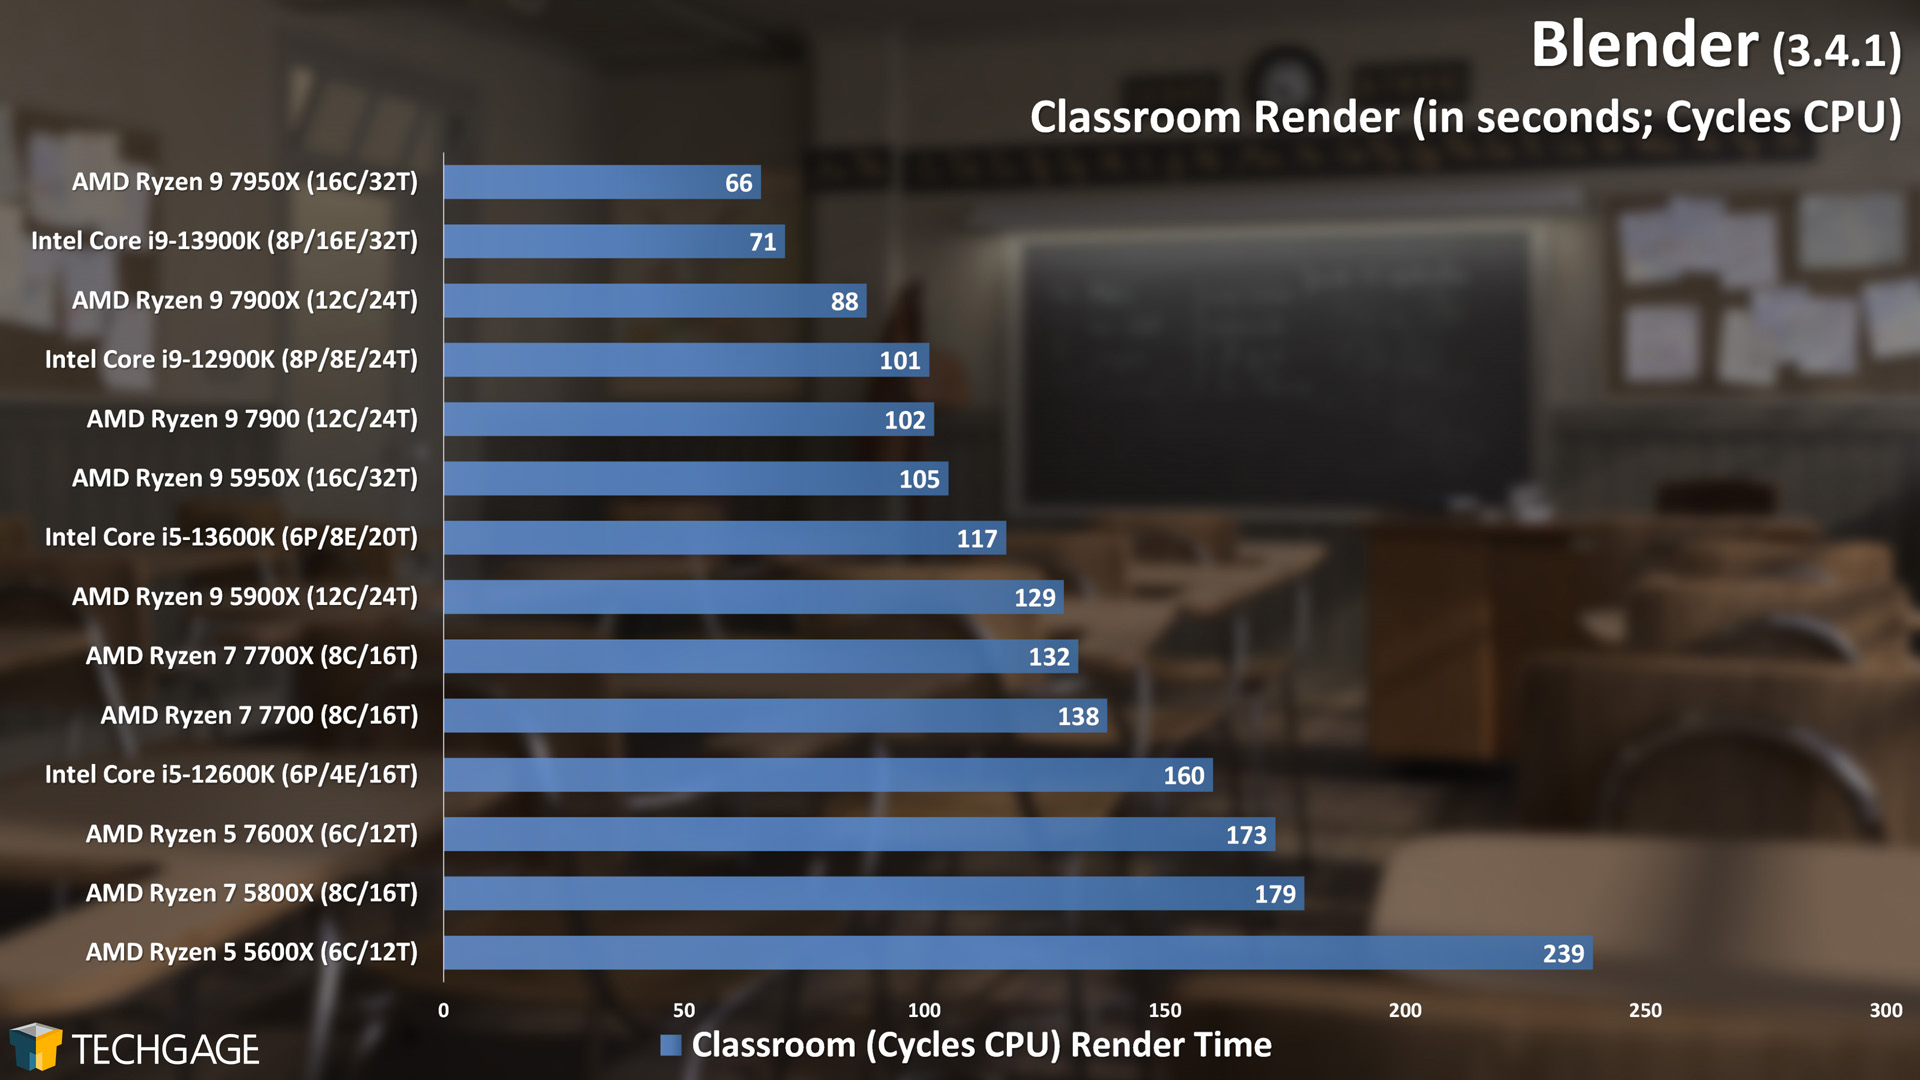 Blender - Cycles CPU Rendering Performance (Classroom)